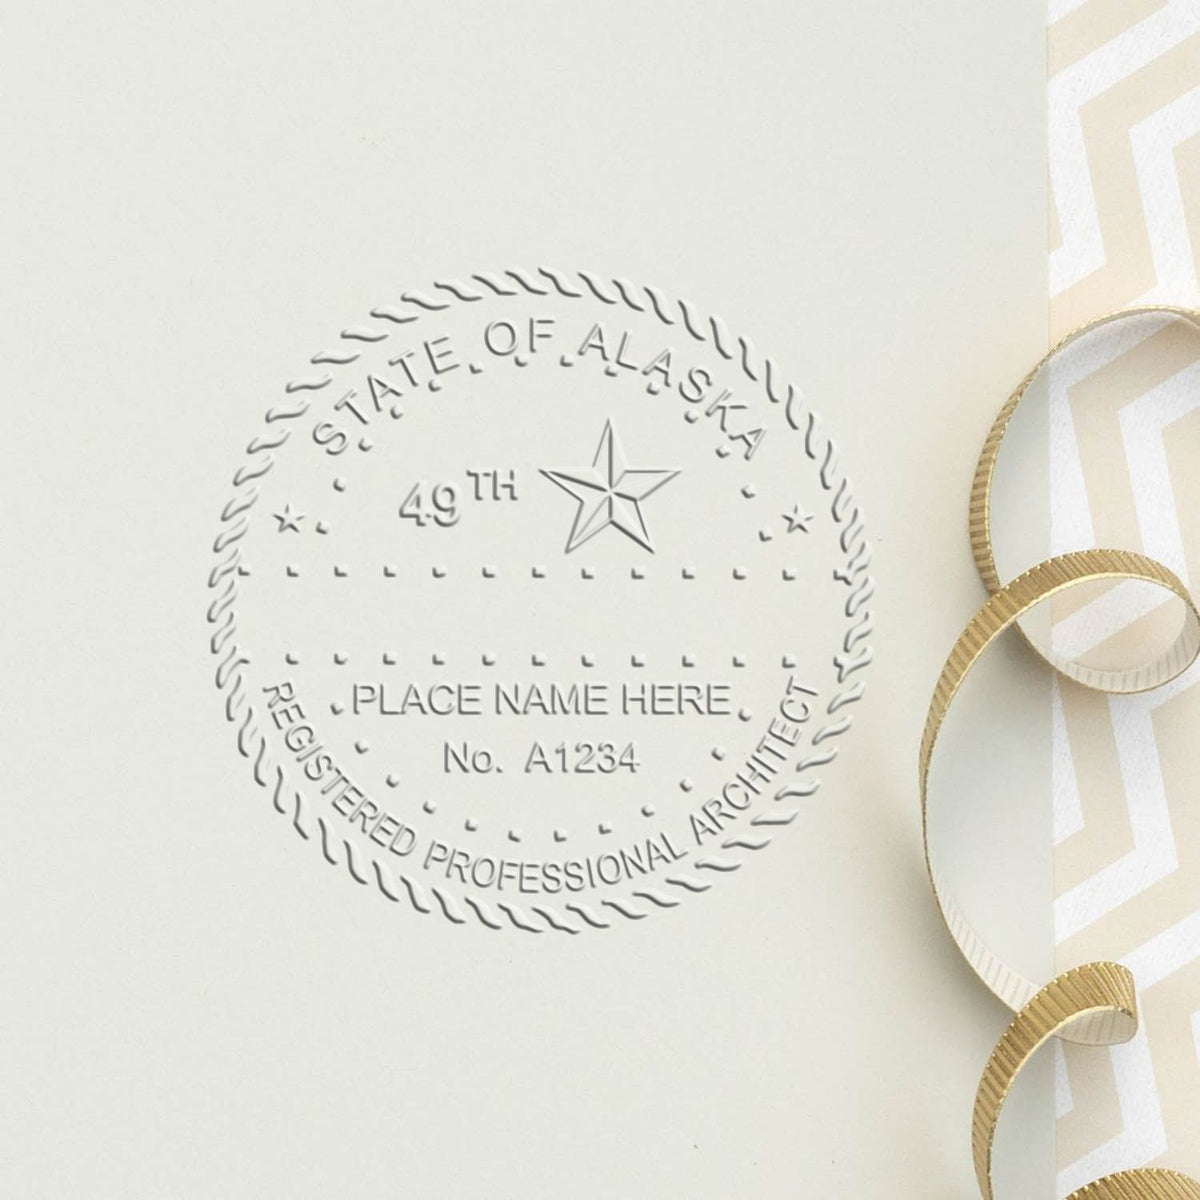 An alternative view of the State of Alaska Long Reach Architectural Embossing Seal stamped on a sheet of paper showing the image in use